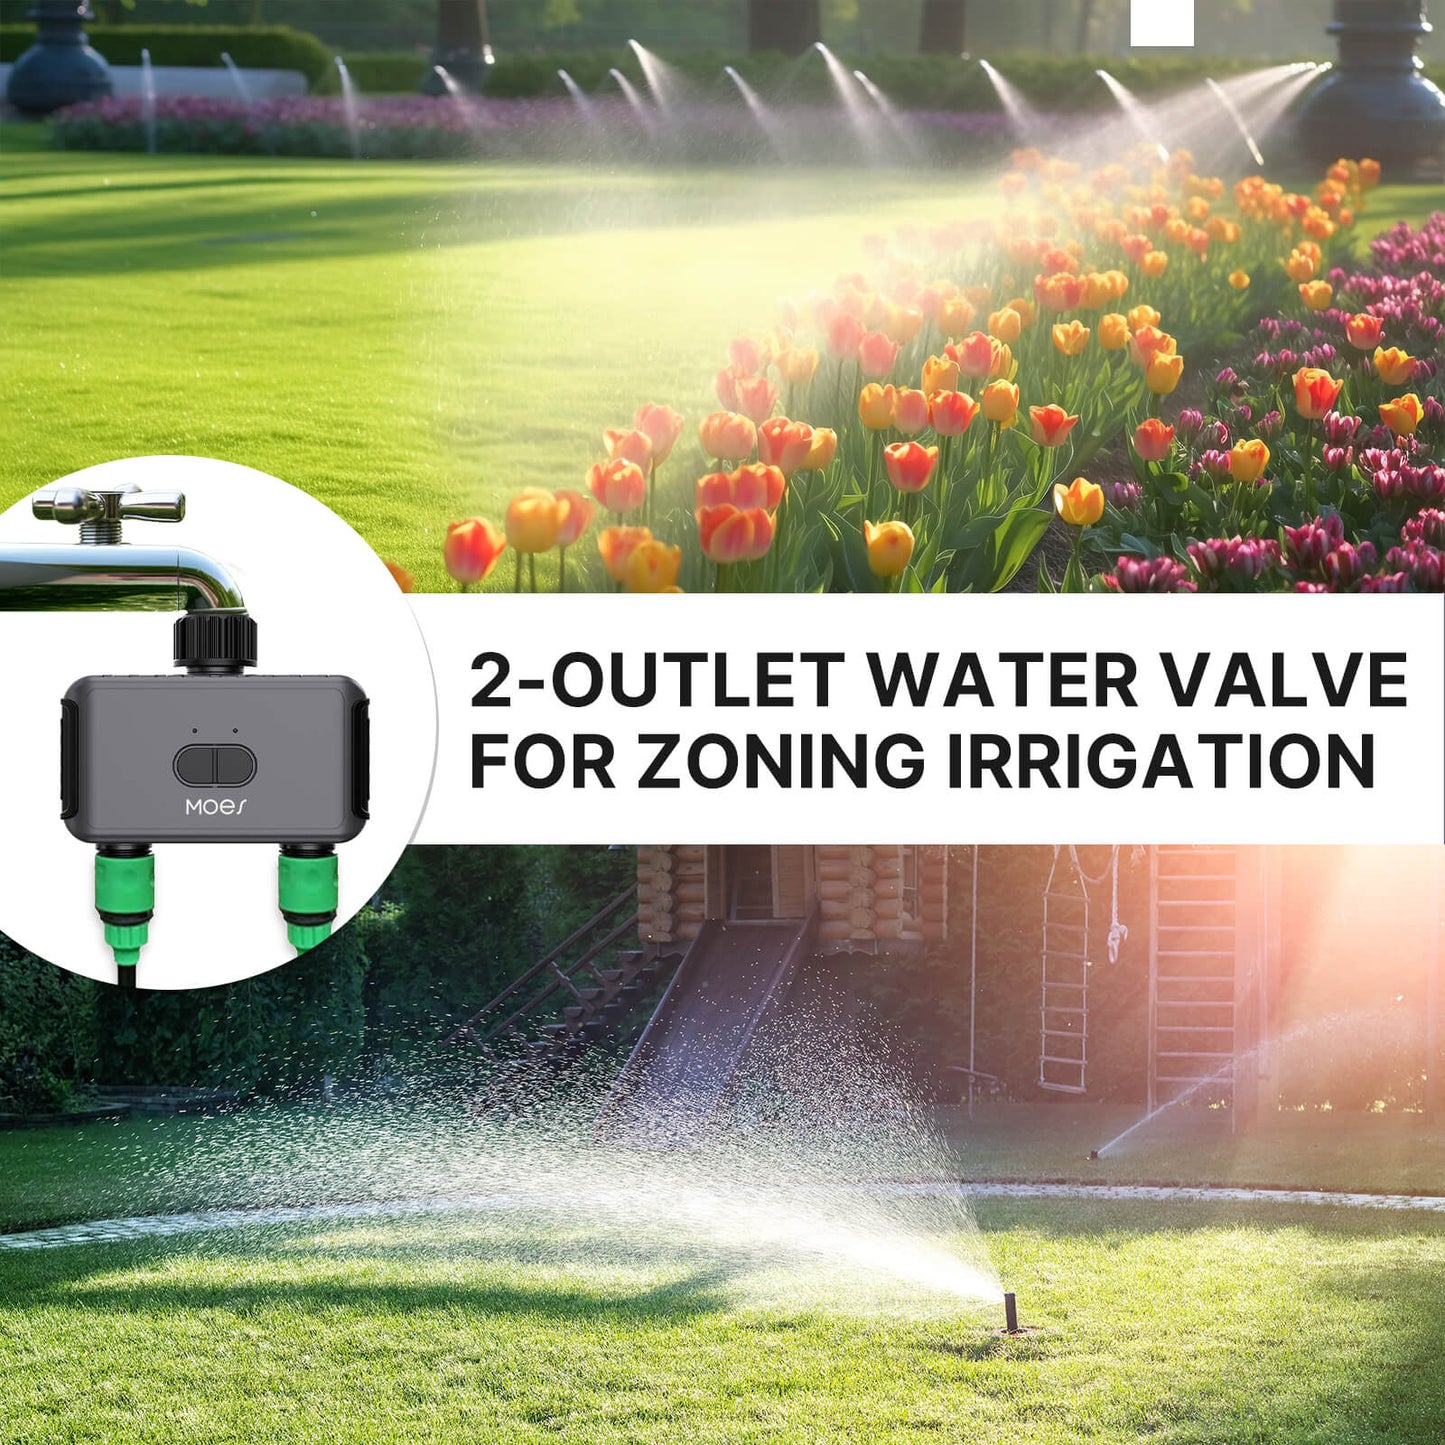 2-outlet water valve for zoning irrigation - MOES